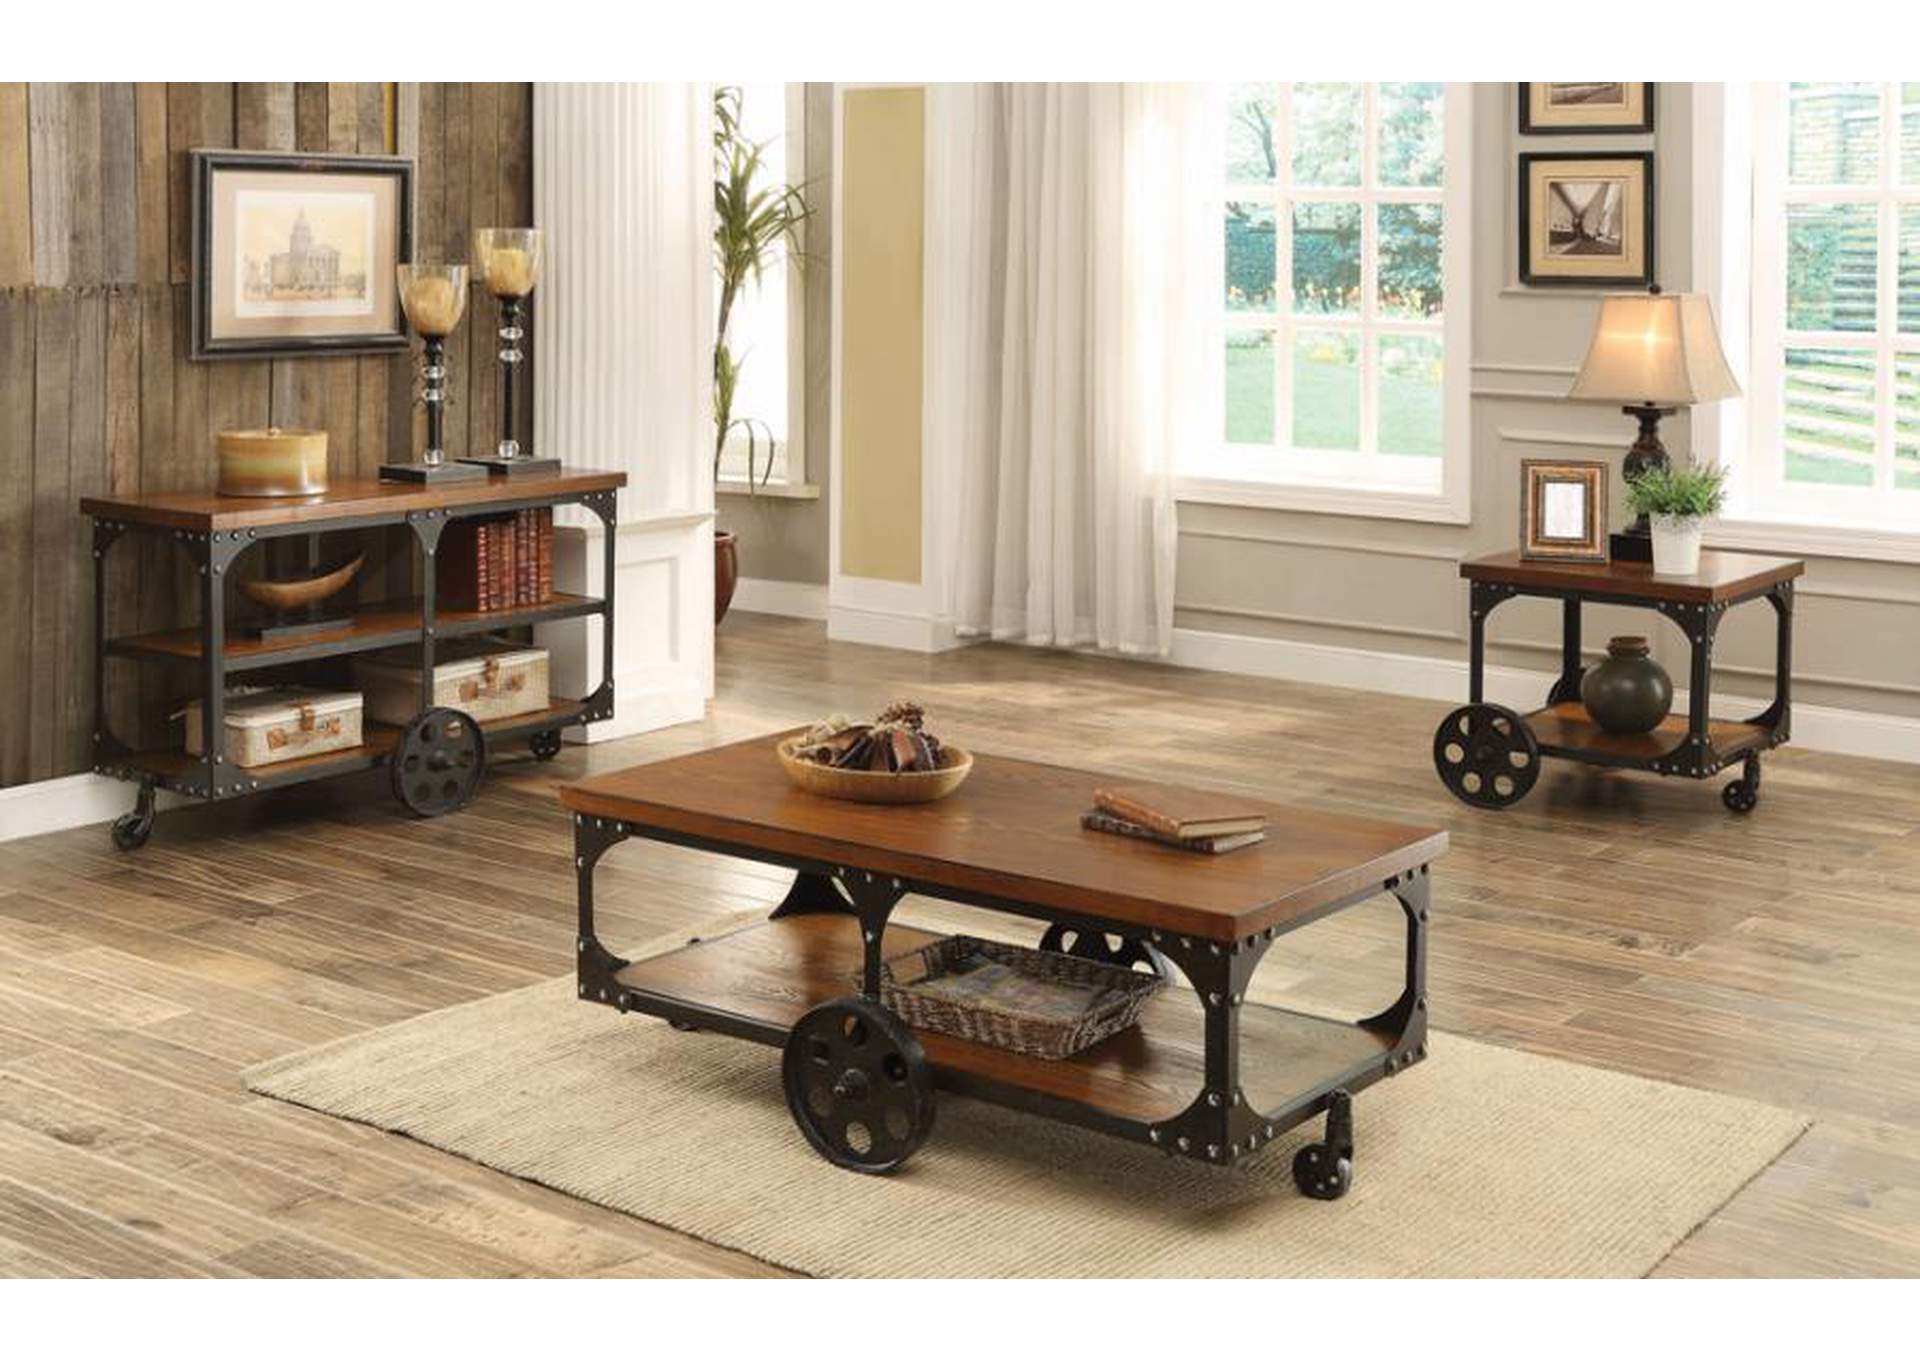 Roy Coffee Table with Casters Rustic Brown,Coaster Furniture